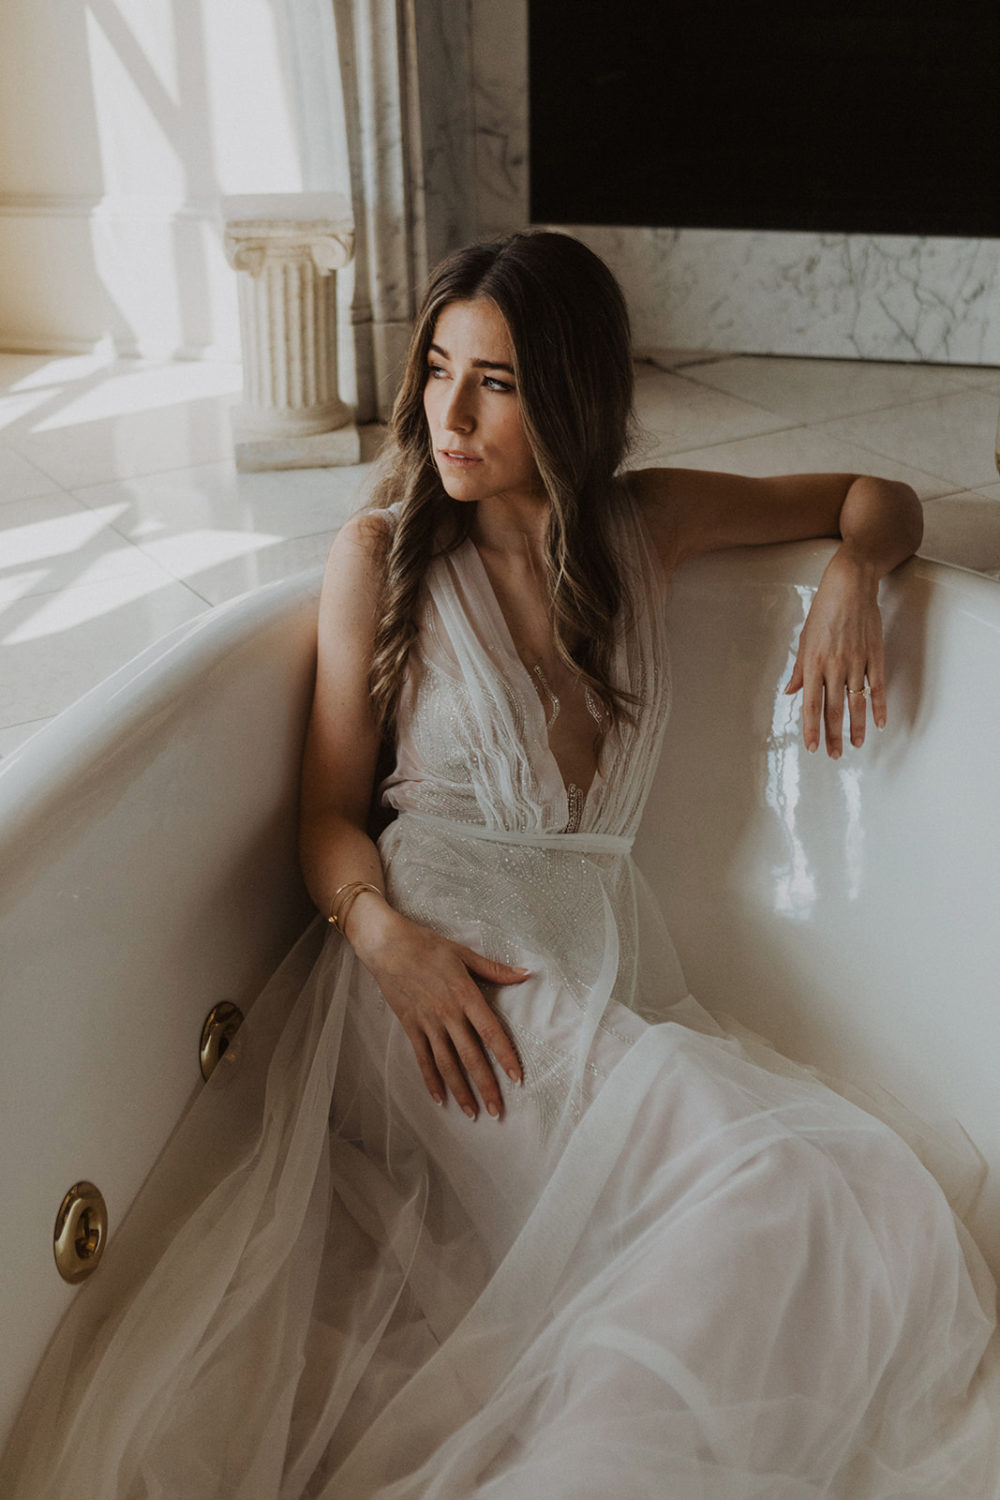 Bride sits in bathtub while getting ready on the wedding morning 